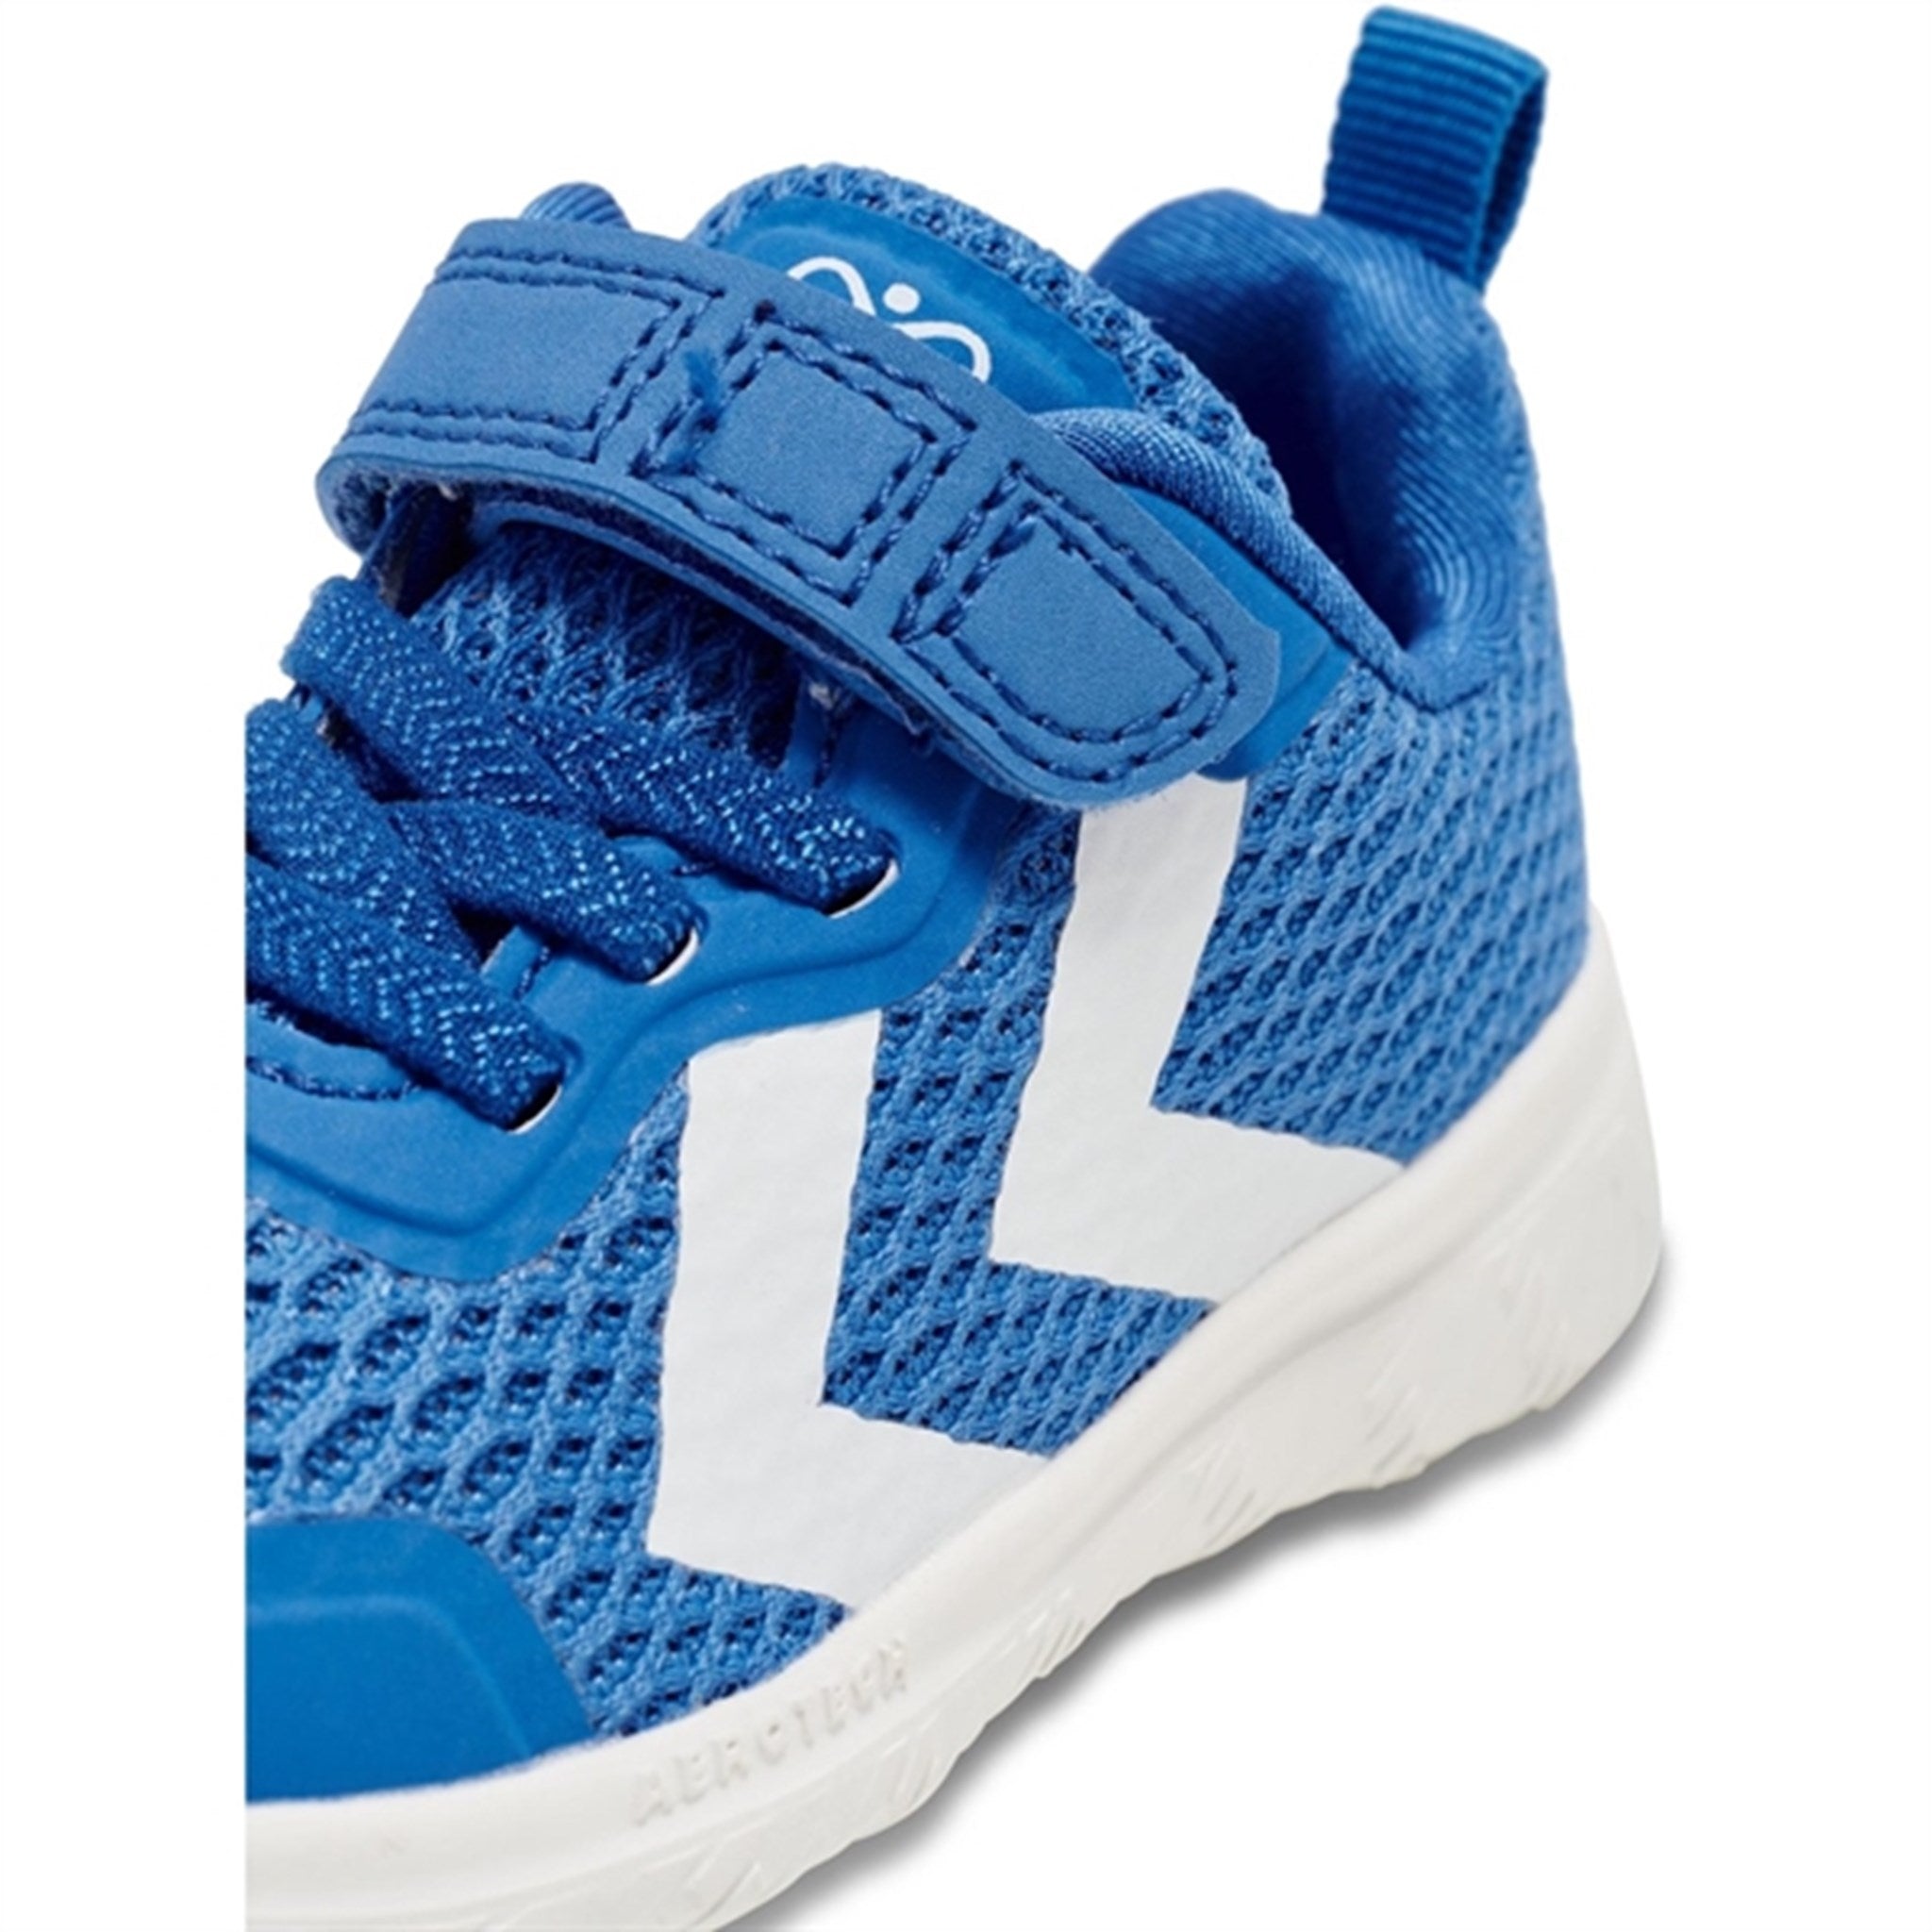 Hummel Blue/White Actus Recycled Infant Sneakers Blue/White 4